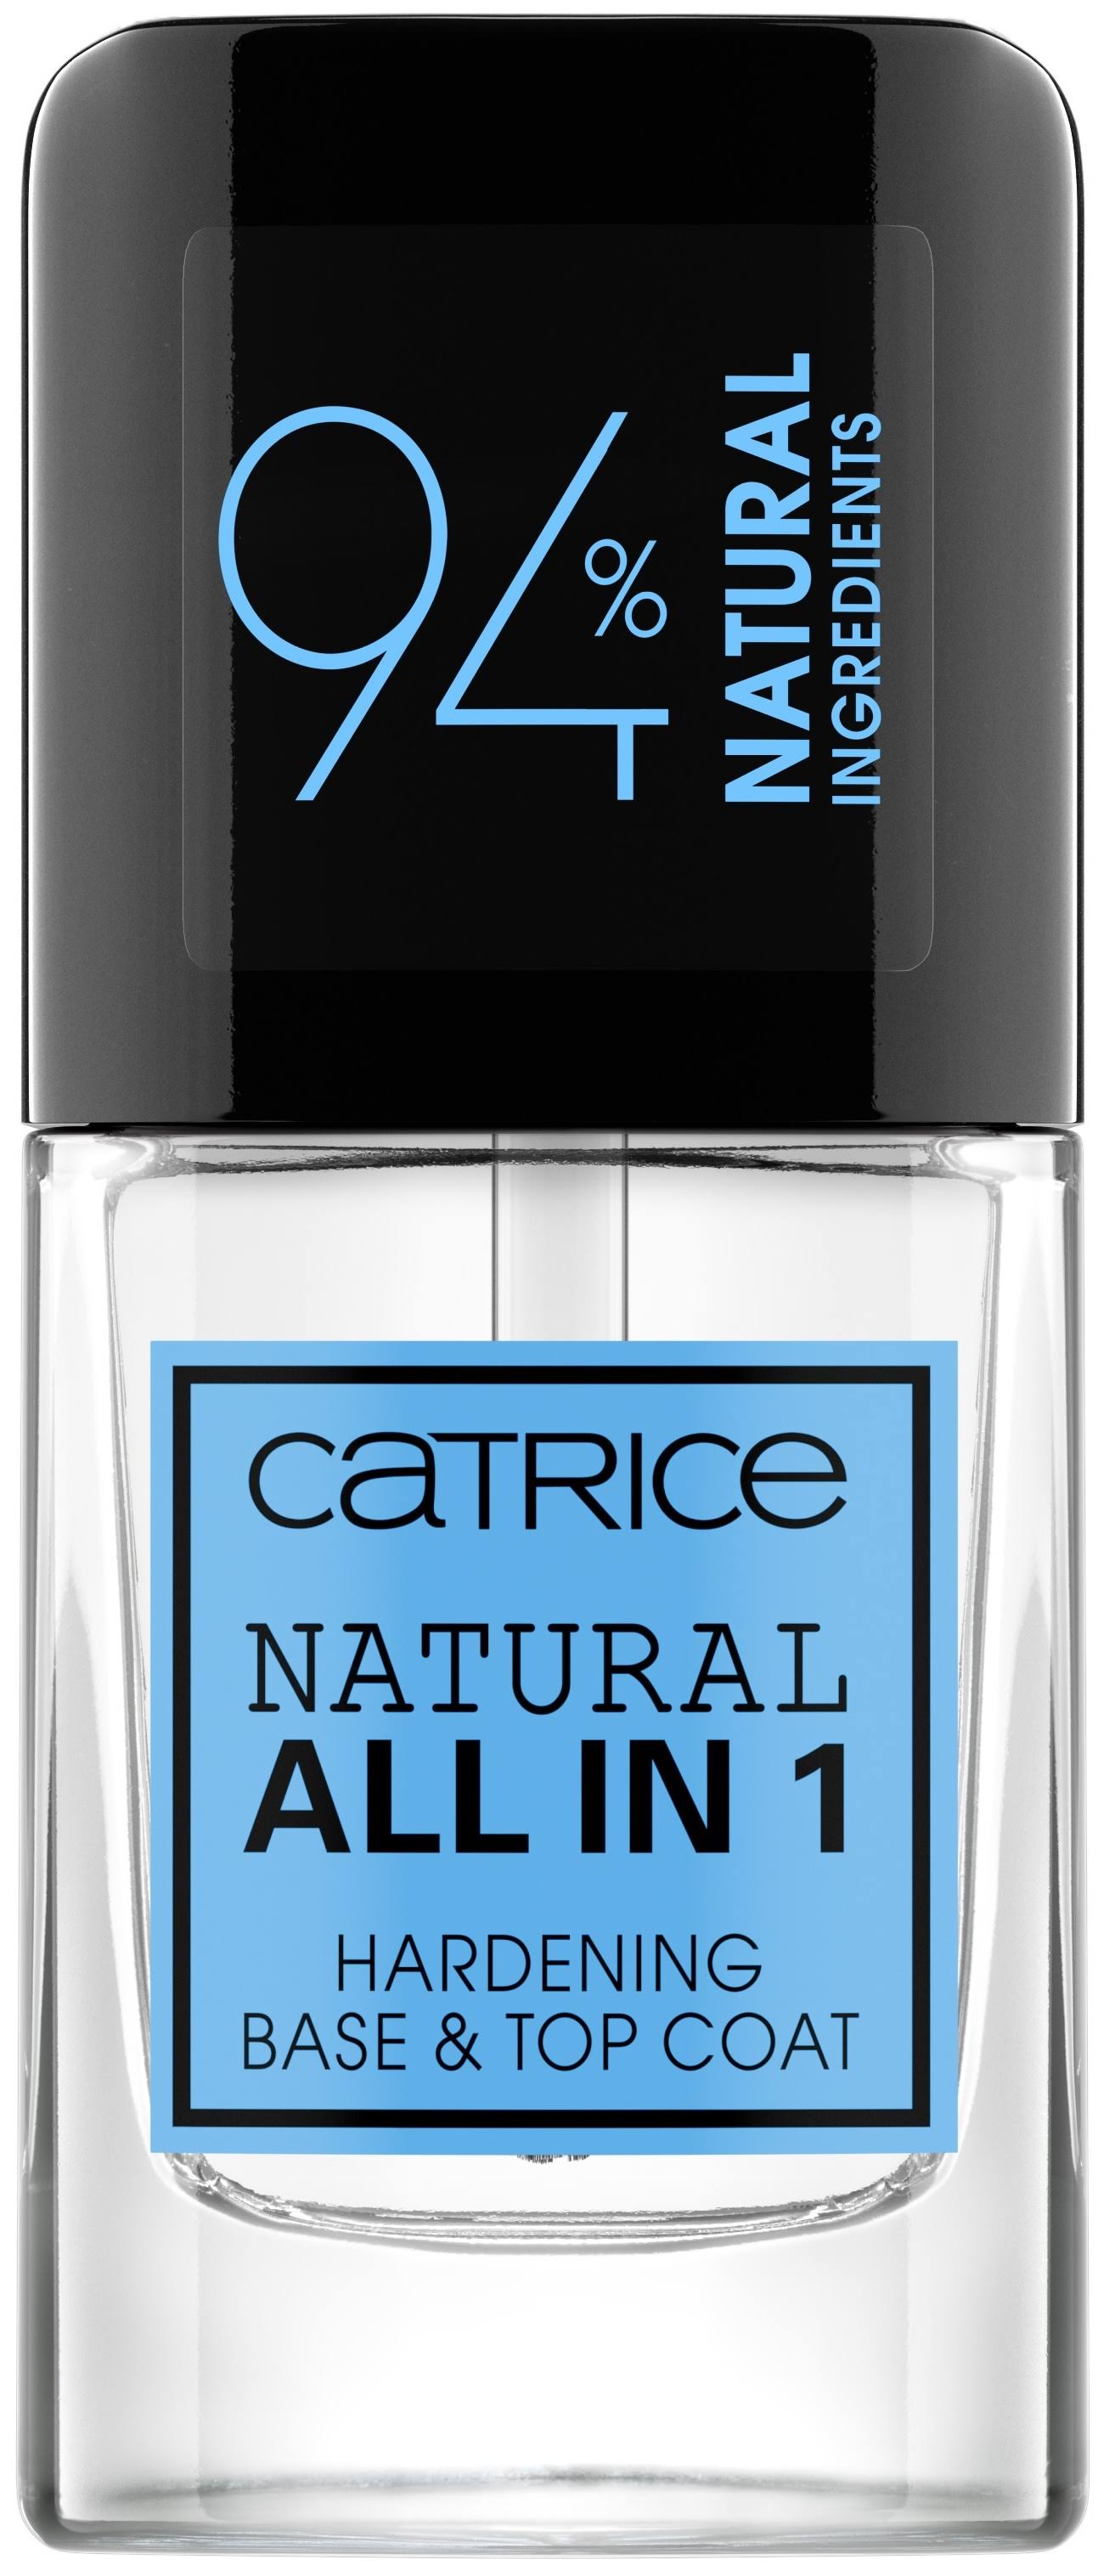 CATRICE NATURAL ALL IN 1 hardening base & top coat 10.5 ml